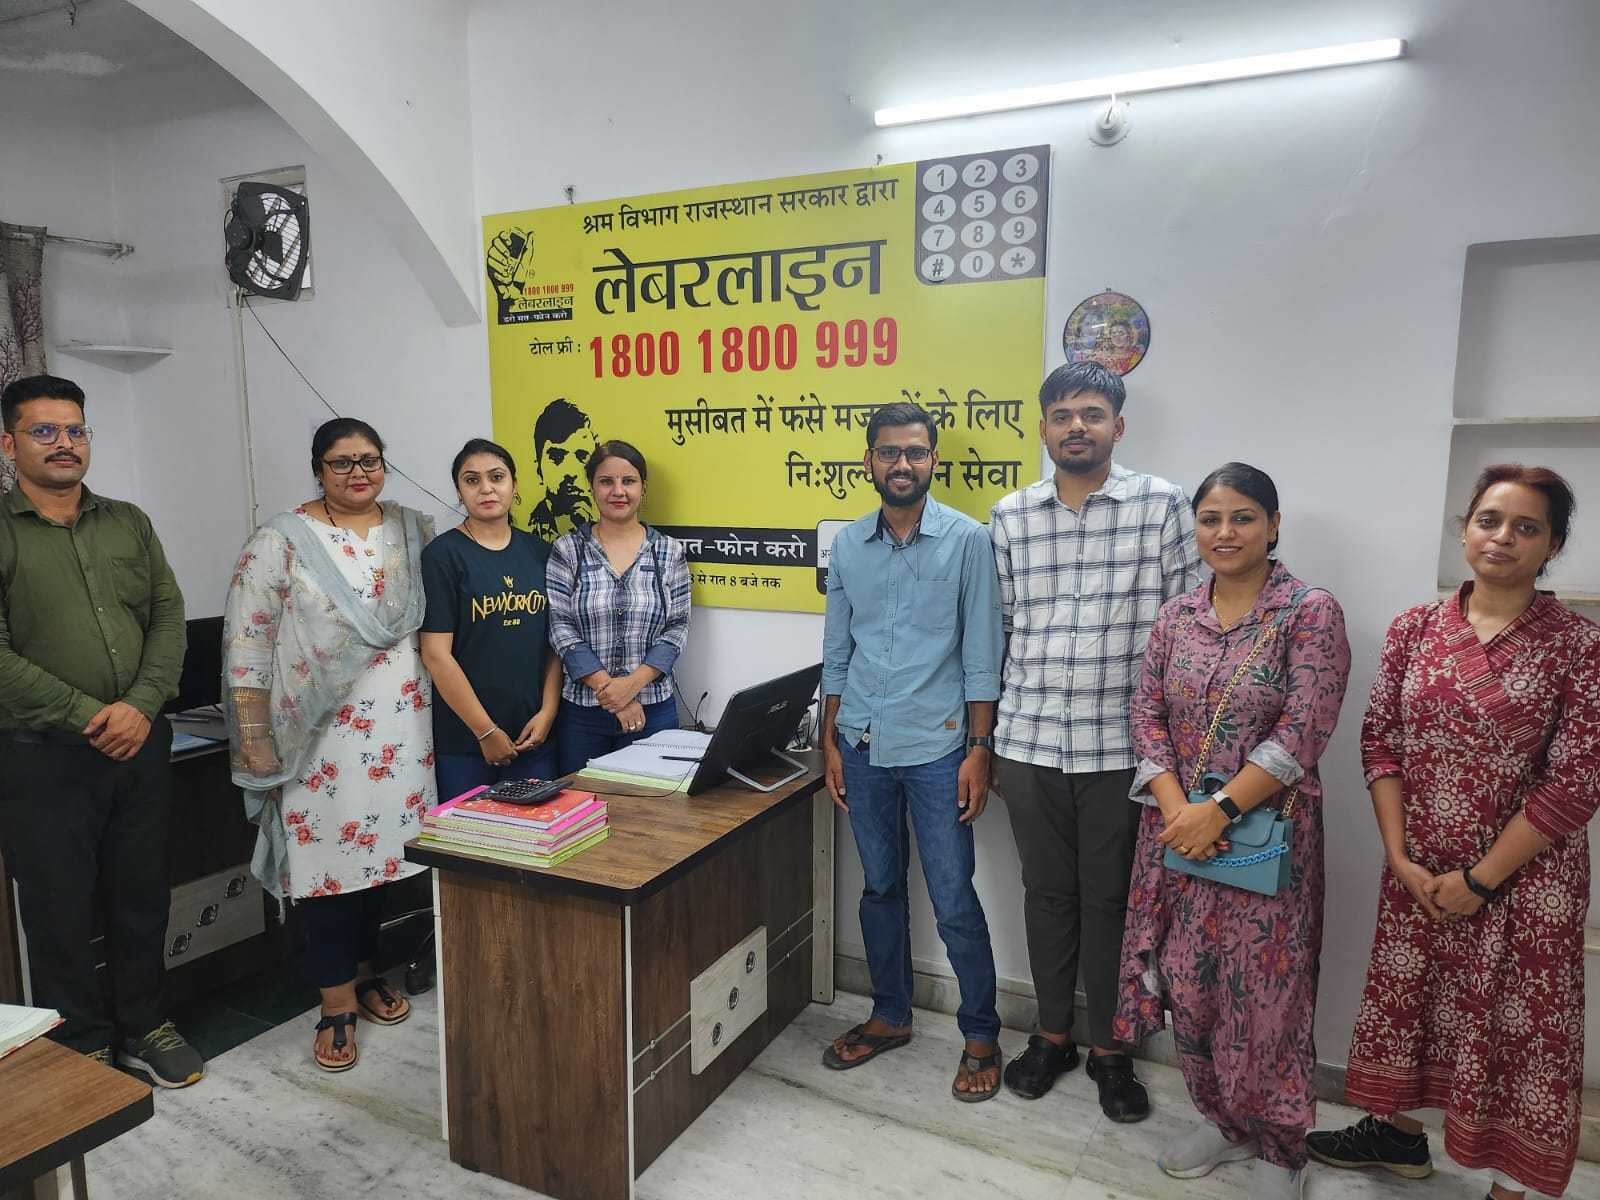 Avni team-members Sachin(4th from right), Vedant(3rd from right) and Nupoor(2nd from right) in the middle with the "Labour line" support team